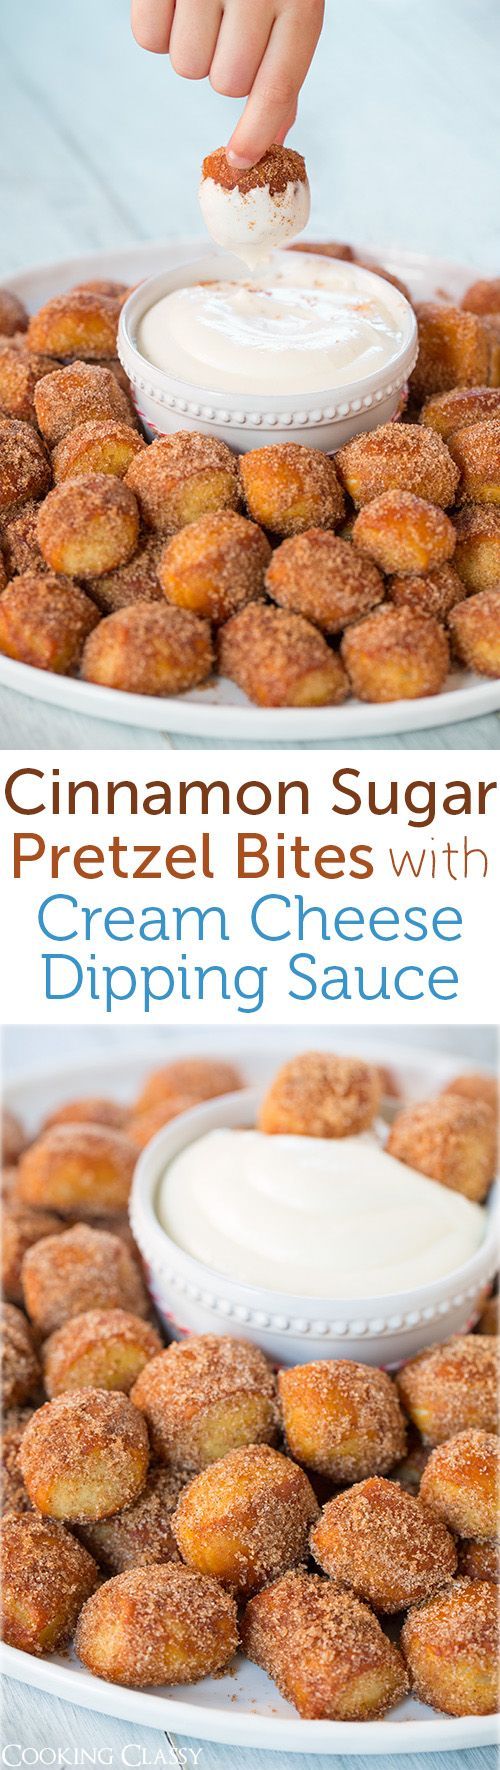 Copycat Auntie Anne’s Cinnamon Sugar Pretzel Bites with Cream Cheese Dipping Sauce – I used to always get Auntie Anne’s pretzel